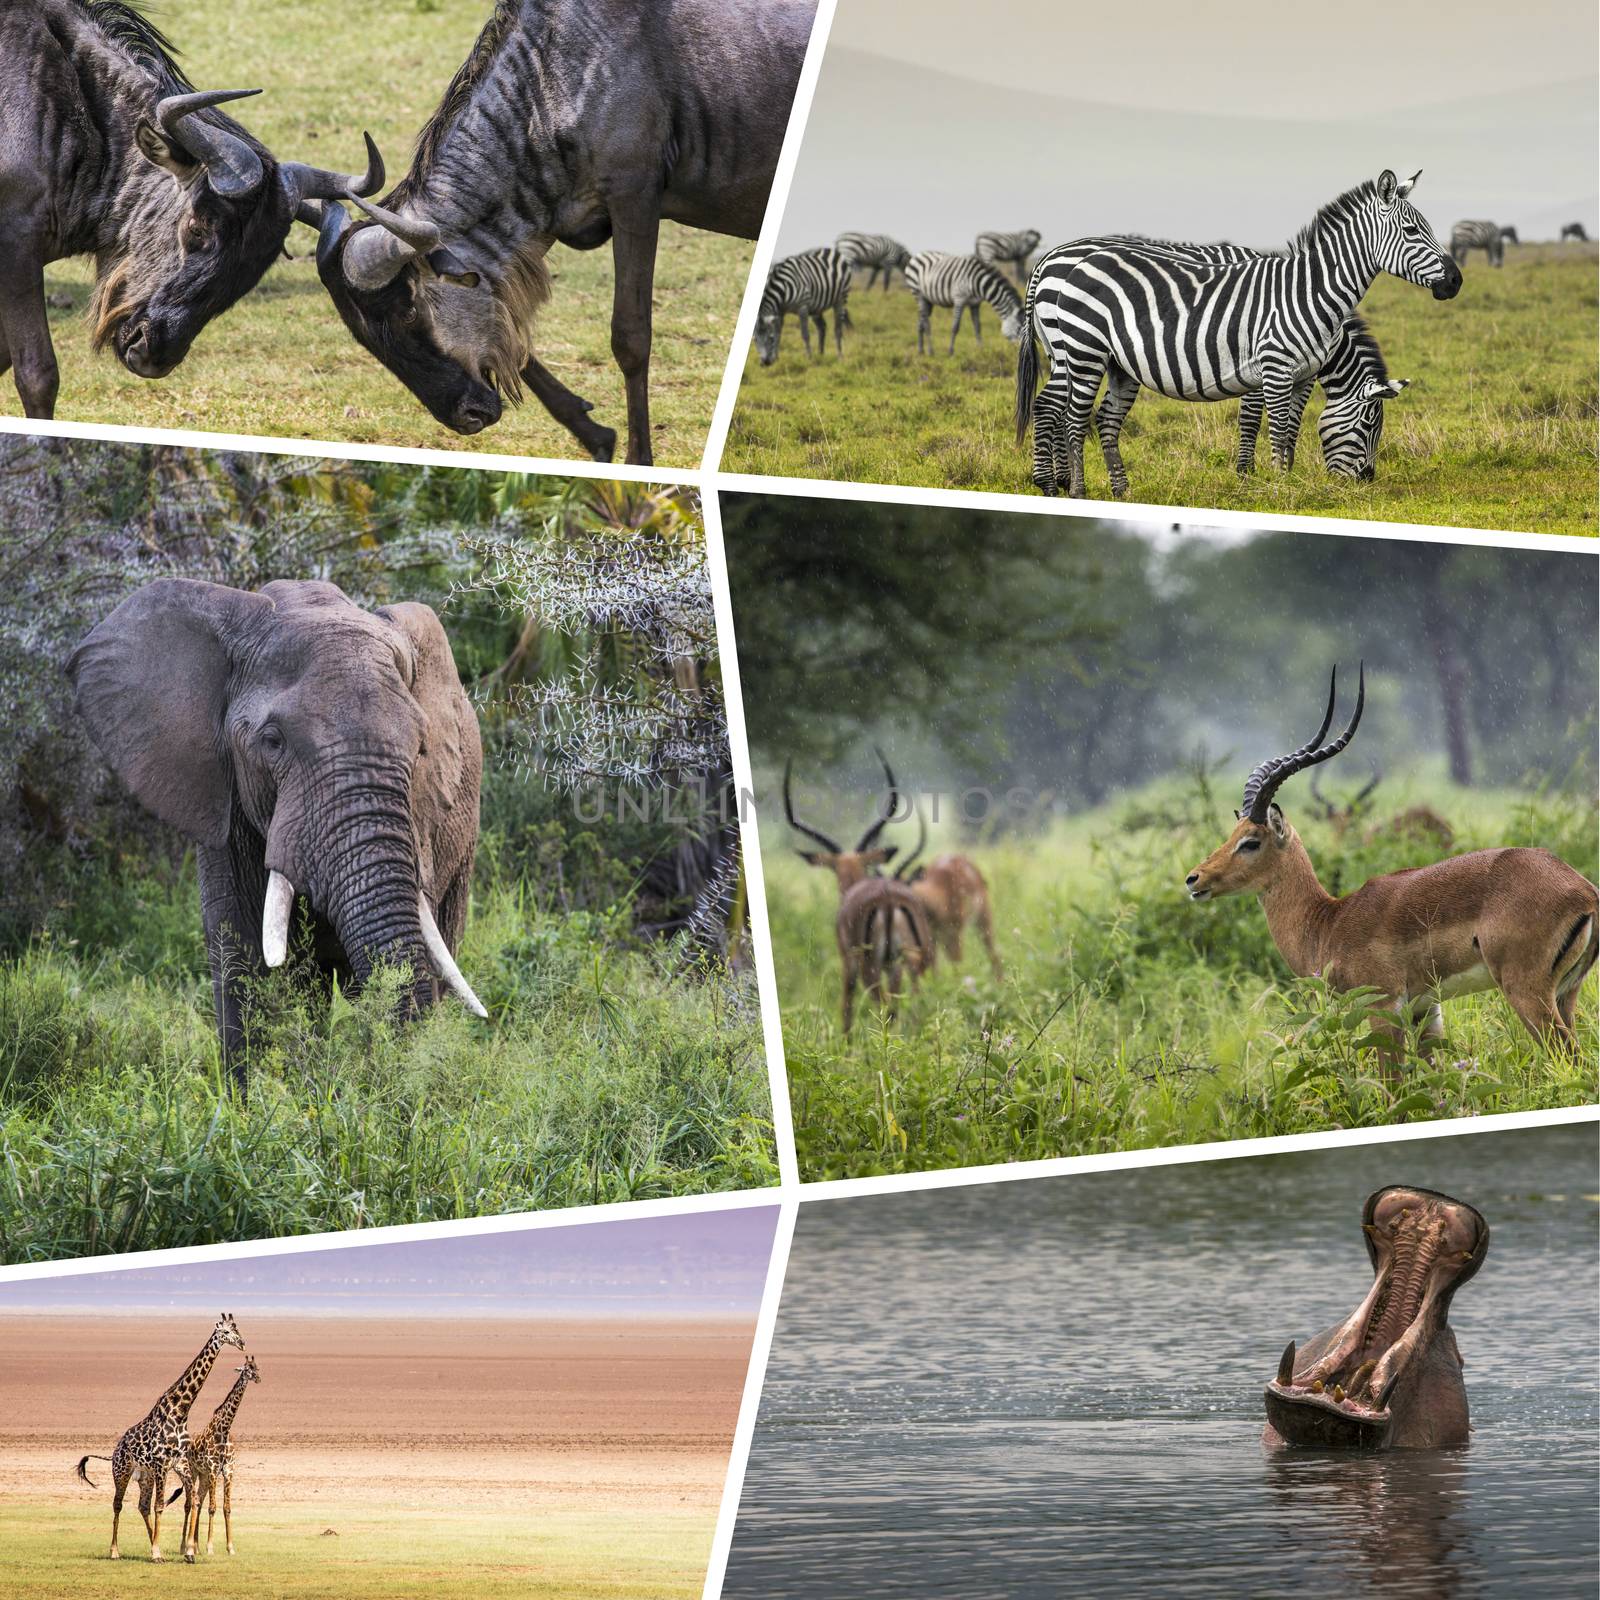 Collage of Animals from Tanzania - travel background (my photos)

